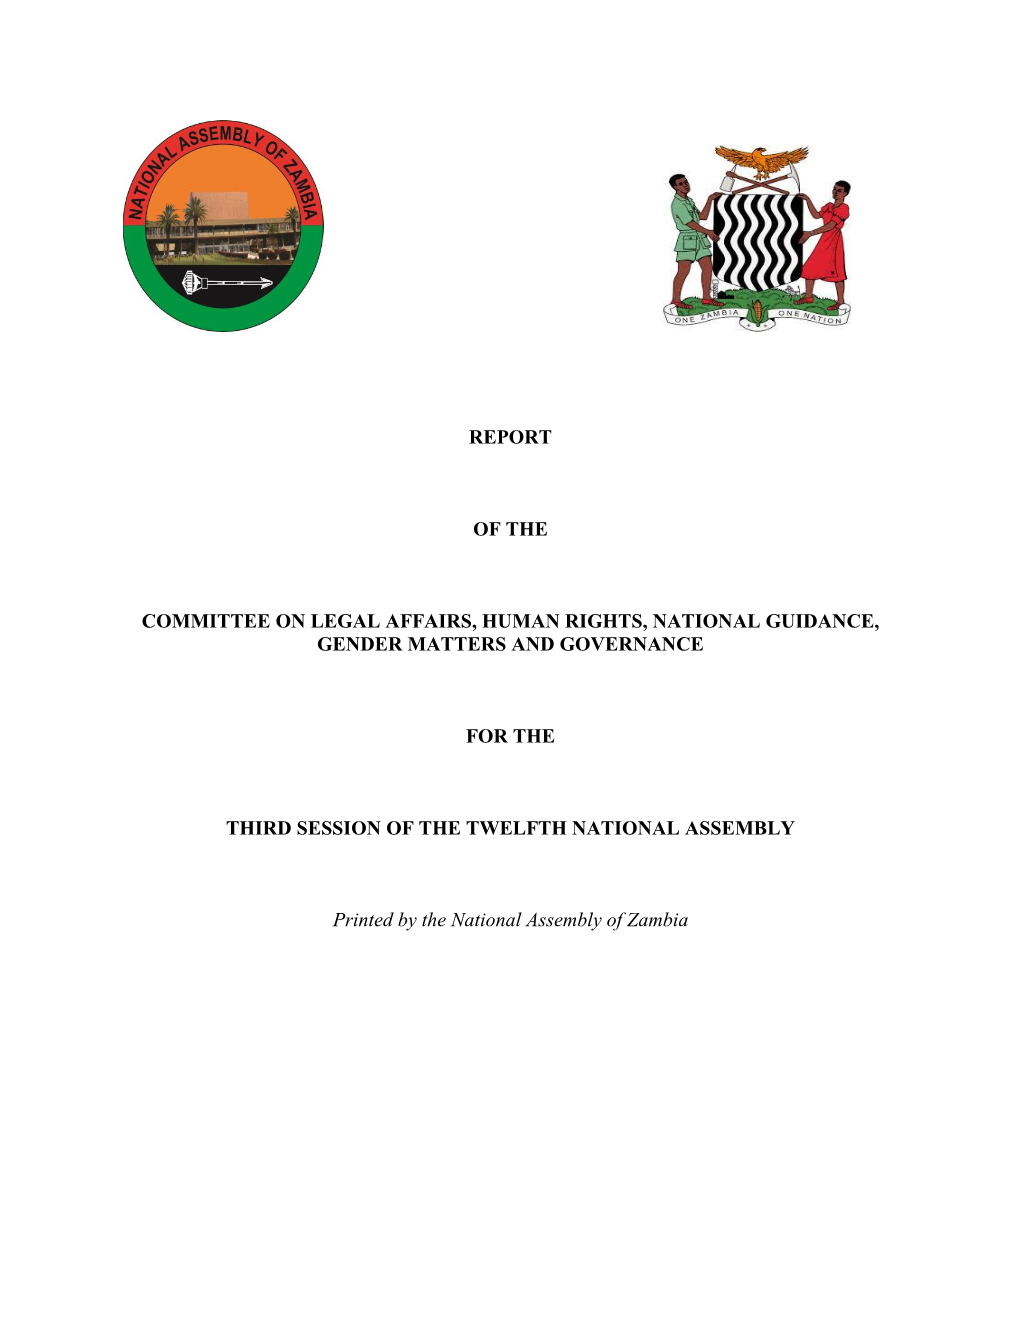 Report of the Committee on Legal Affairs, Human Rights, National Guidance, Gender Matters and Governance for the Third Session of the Twelfth National Assembly